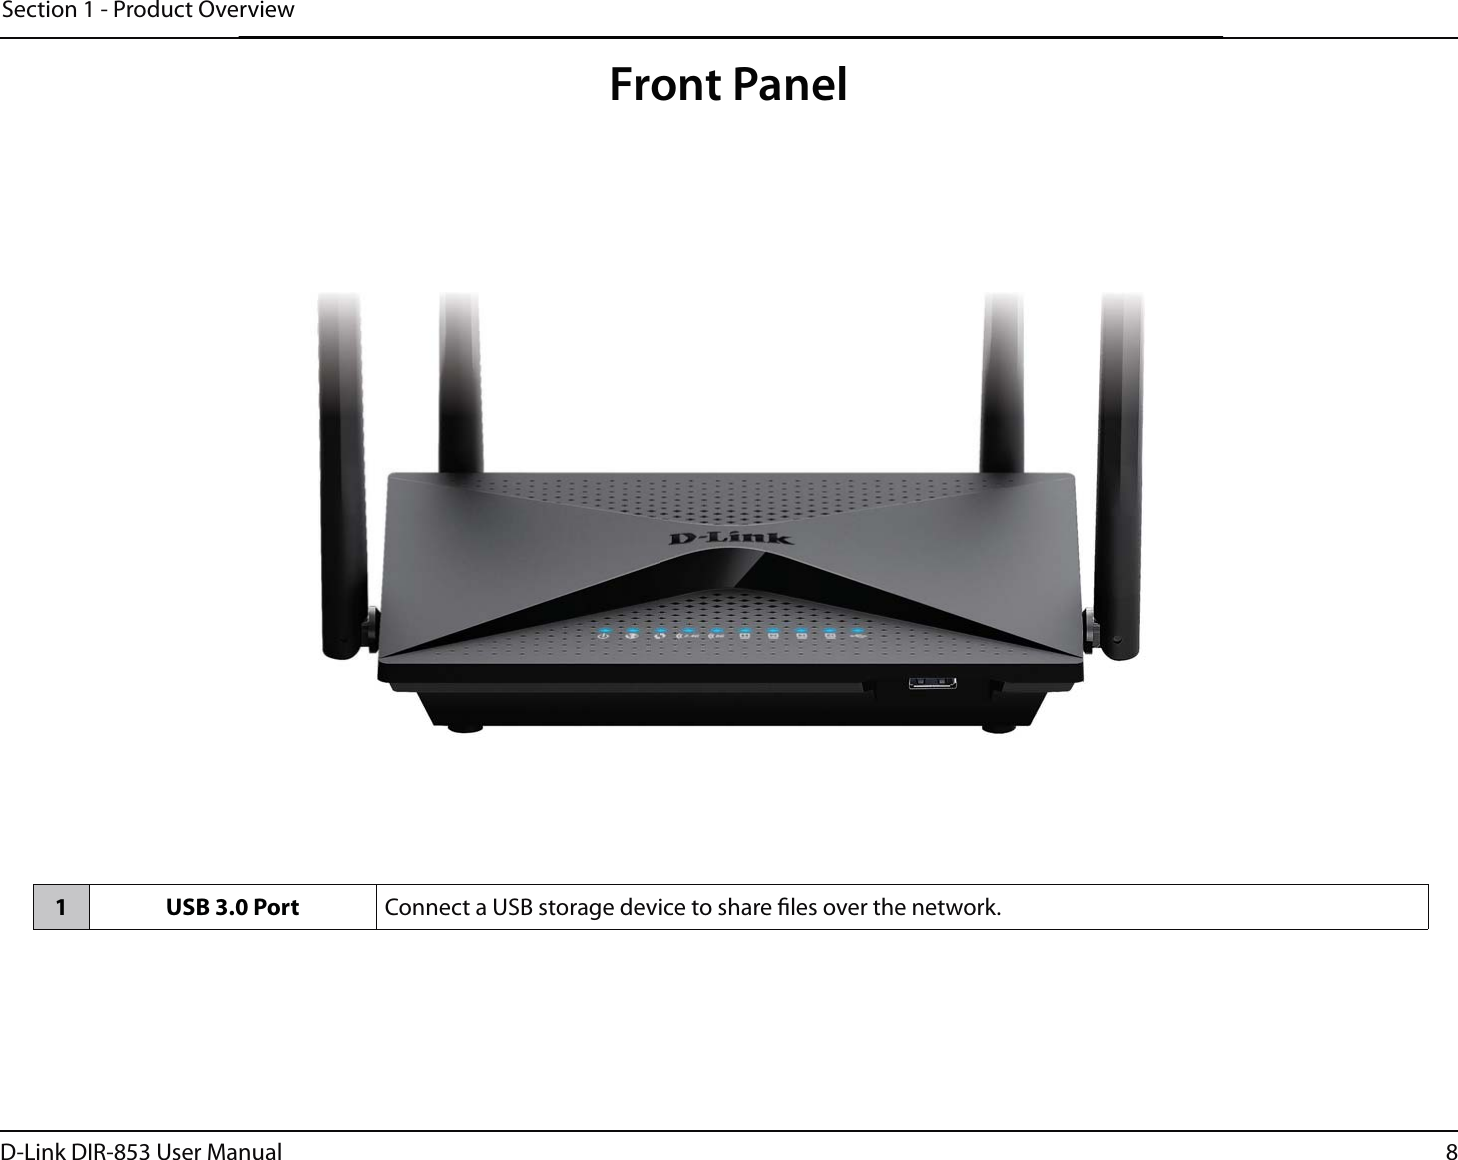 8D-Link DIR-853 User ManualSection 1 - Product OverviewFront Panel1 USB 3.0 Port Connect a USB storage device to share les over the network.rviewFront Panel